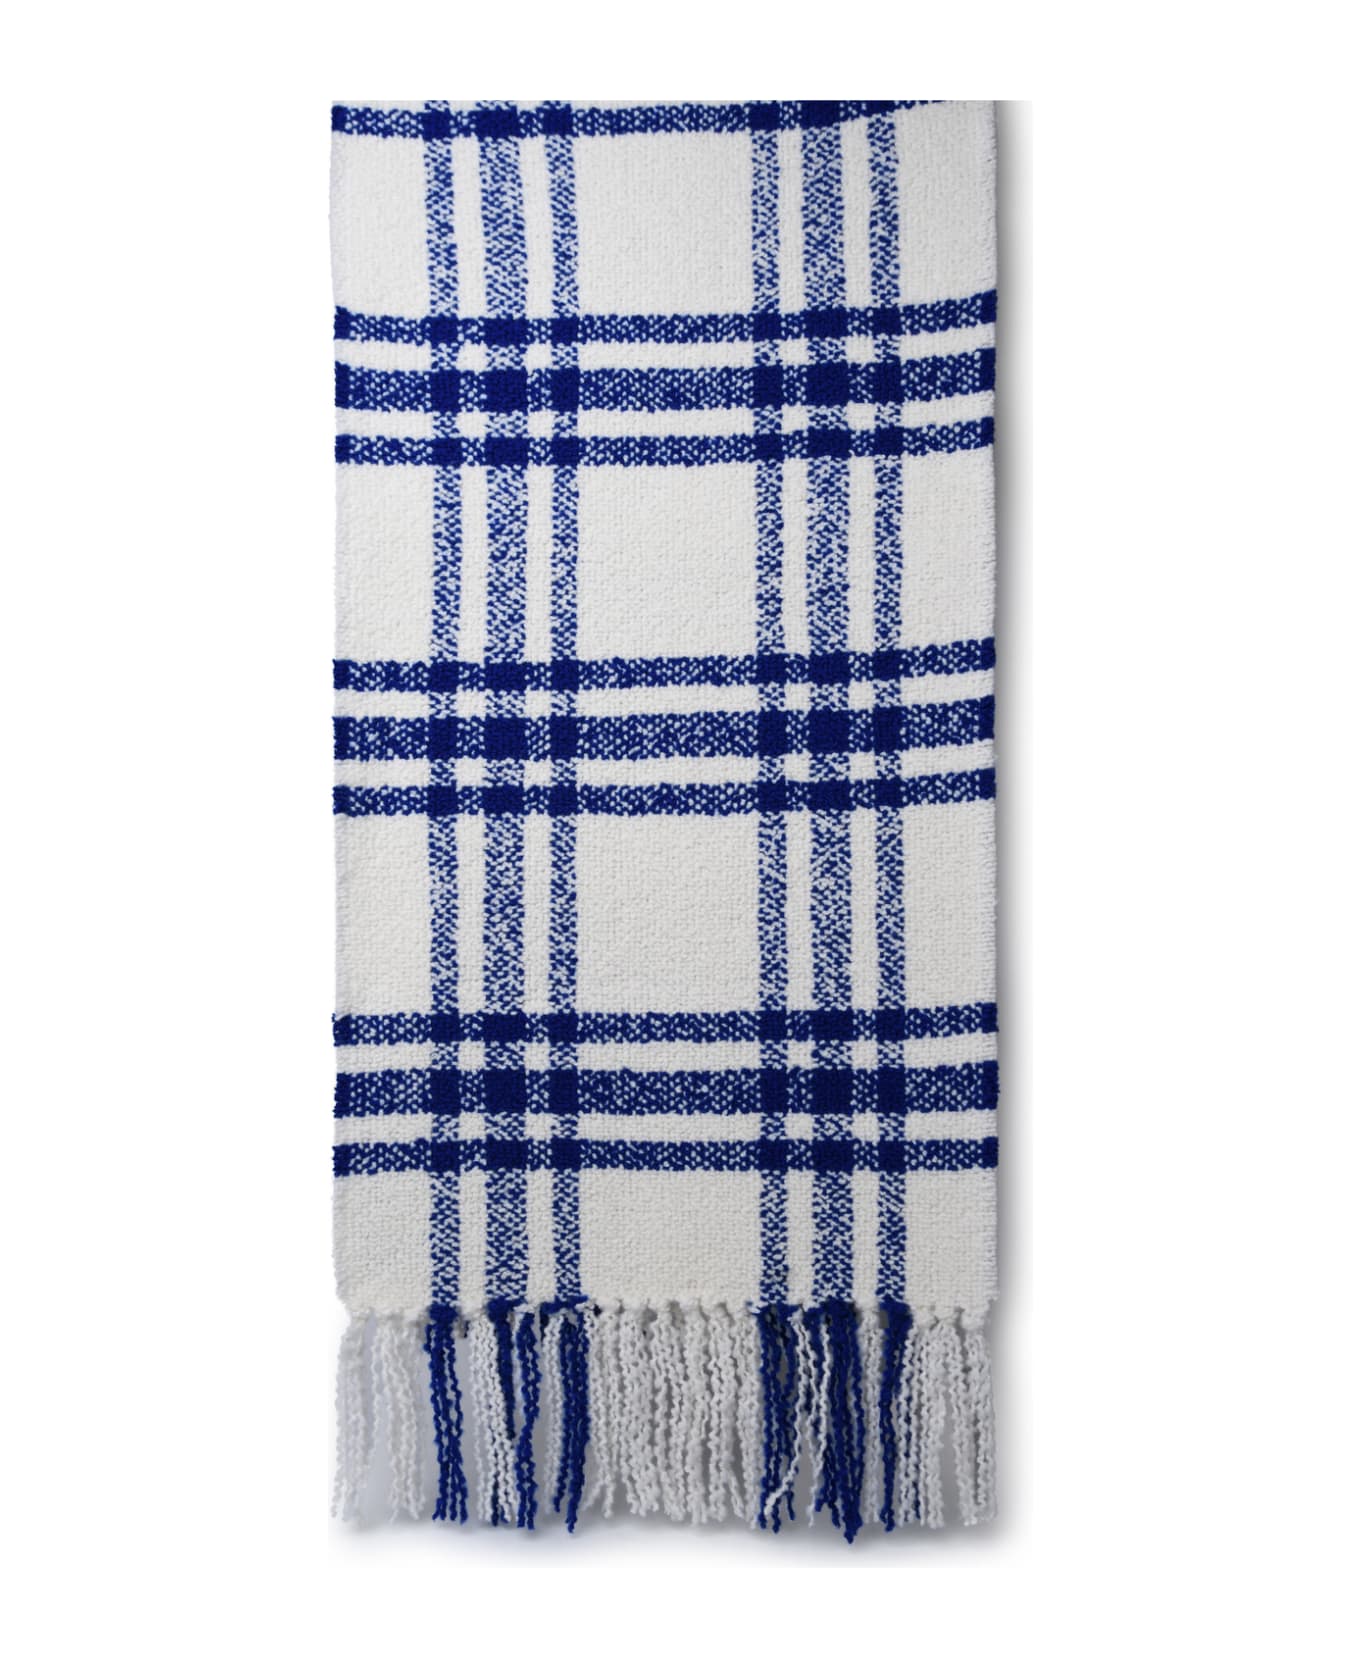 Burberry White Wool Scarf - Blue